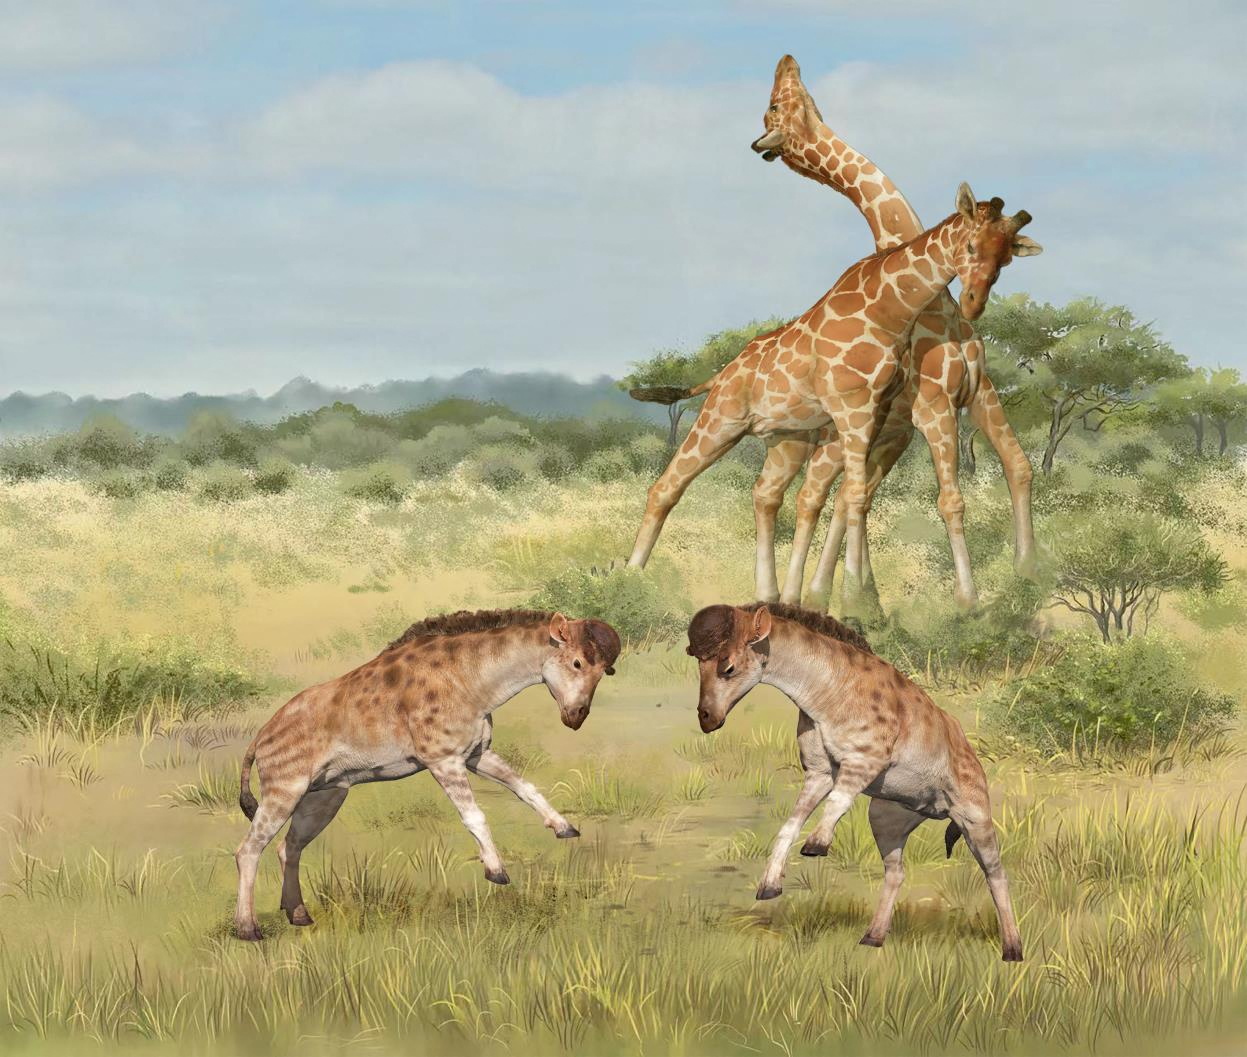 Intermale competitions involving members of the giraffe family are seen in an undated illustration